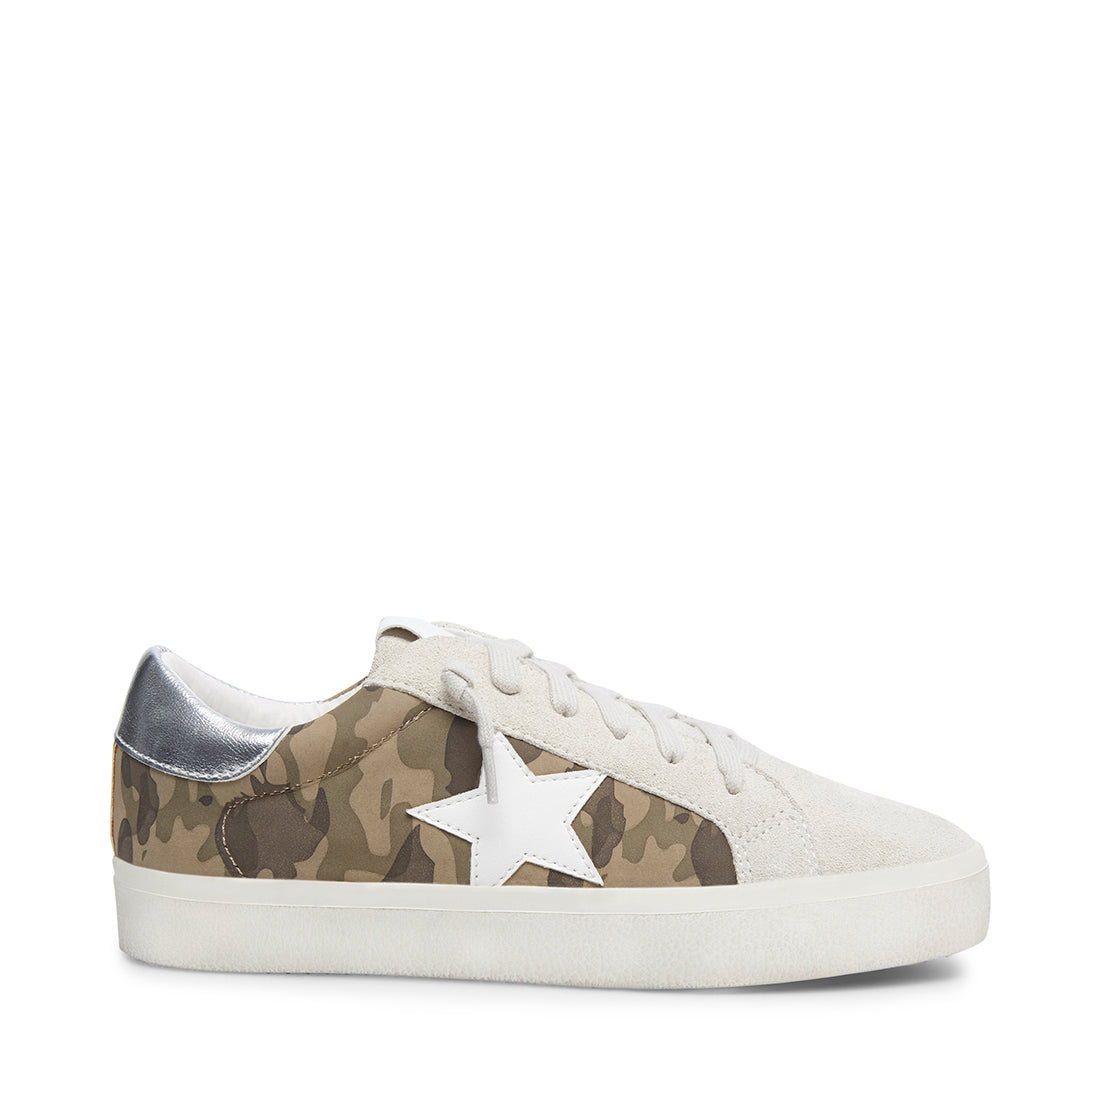 steve madden camouflage tennis shoes